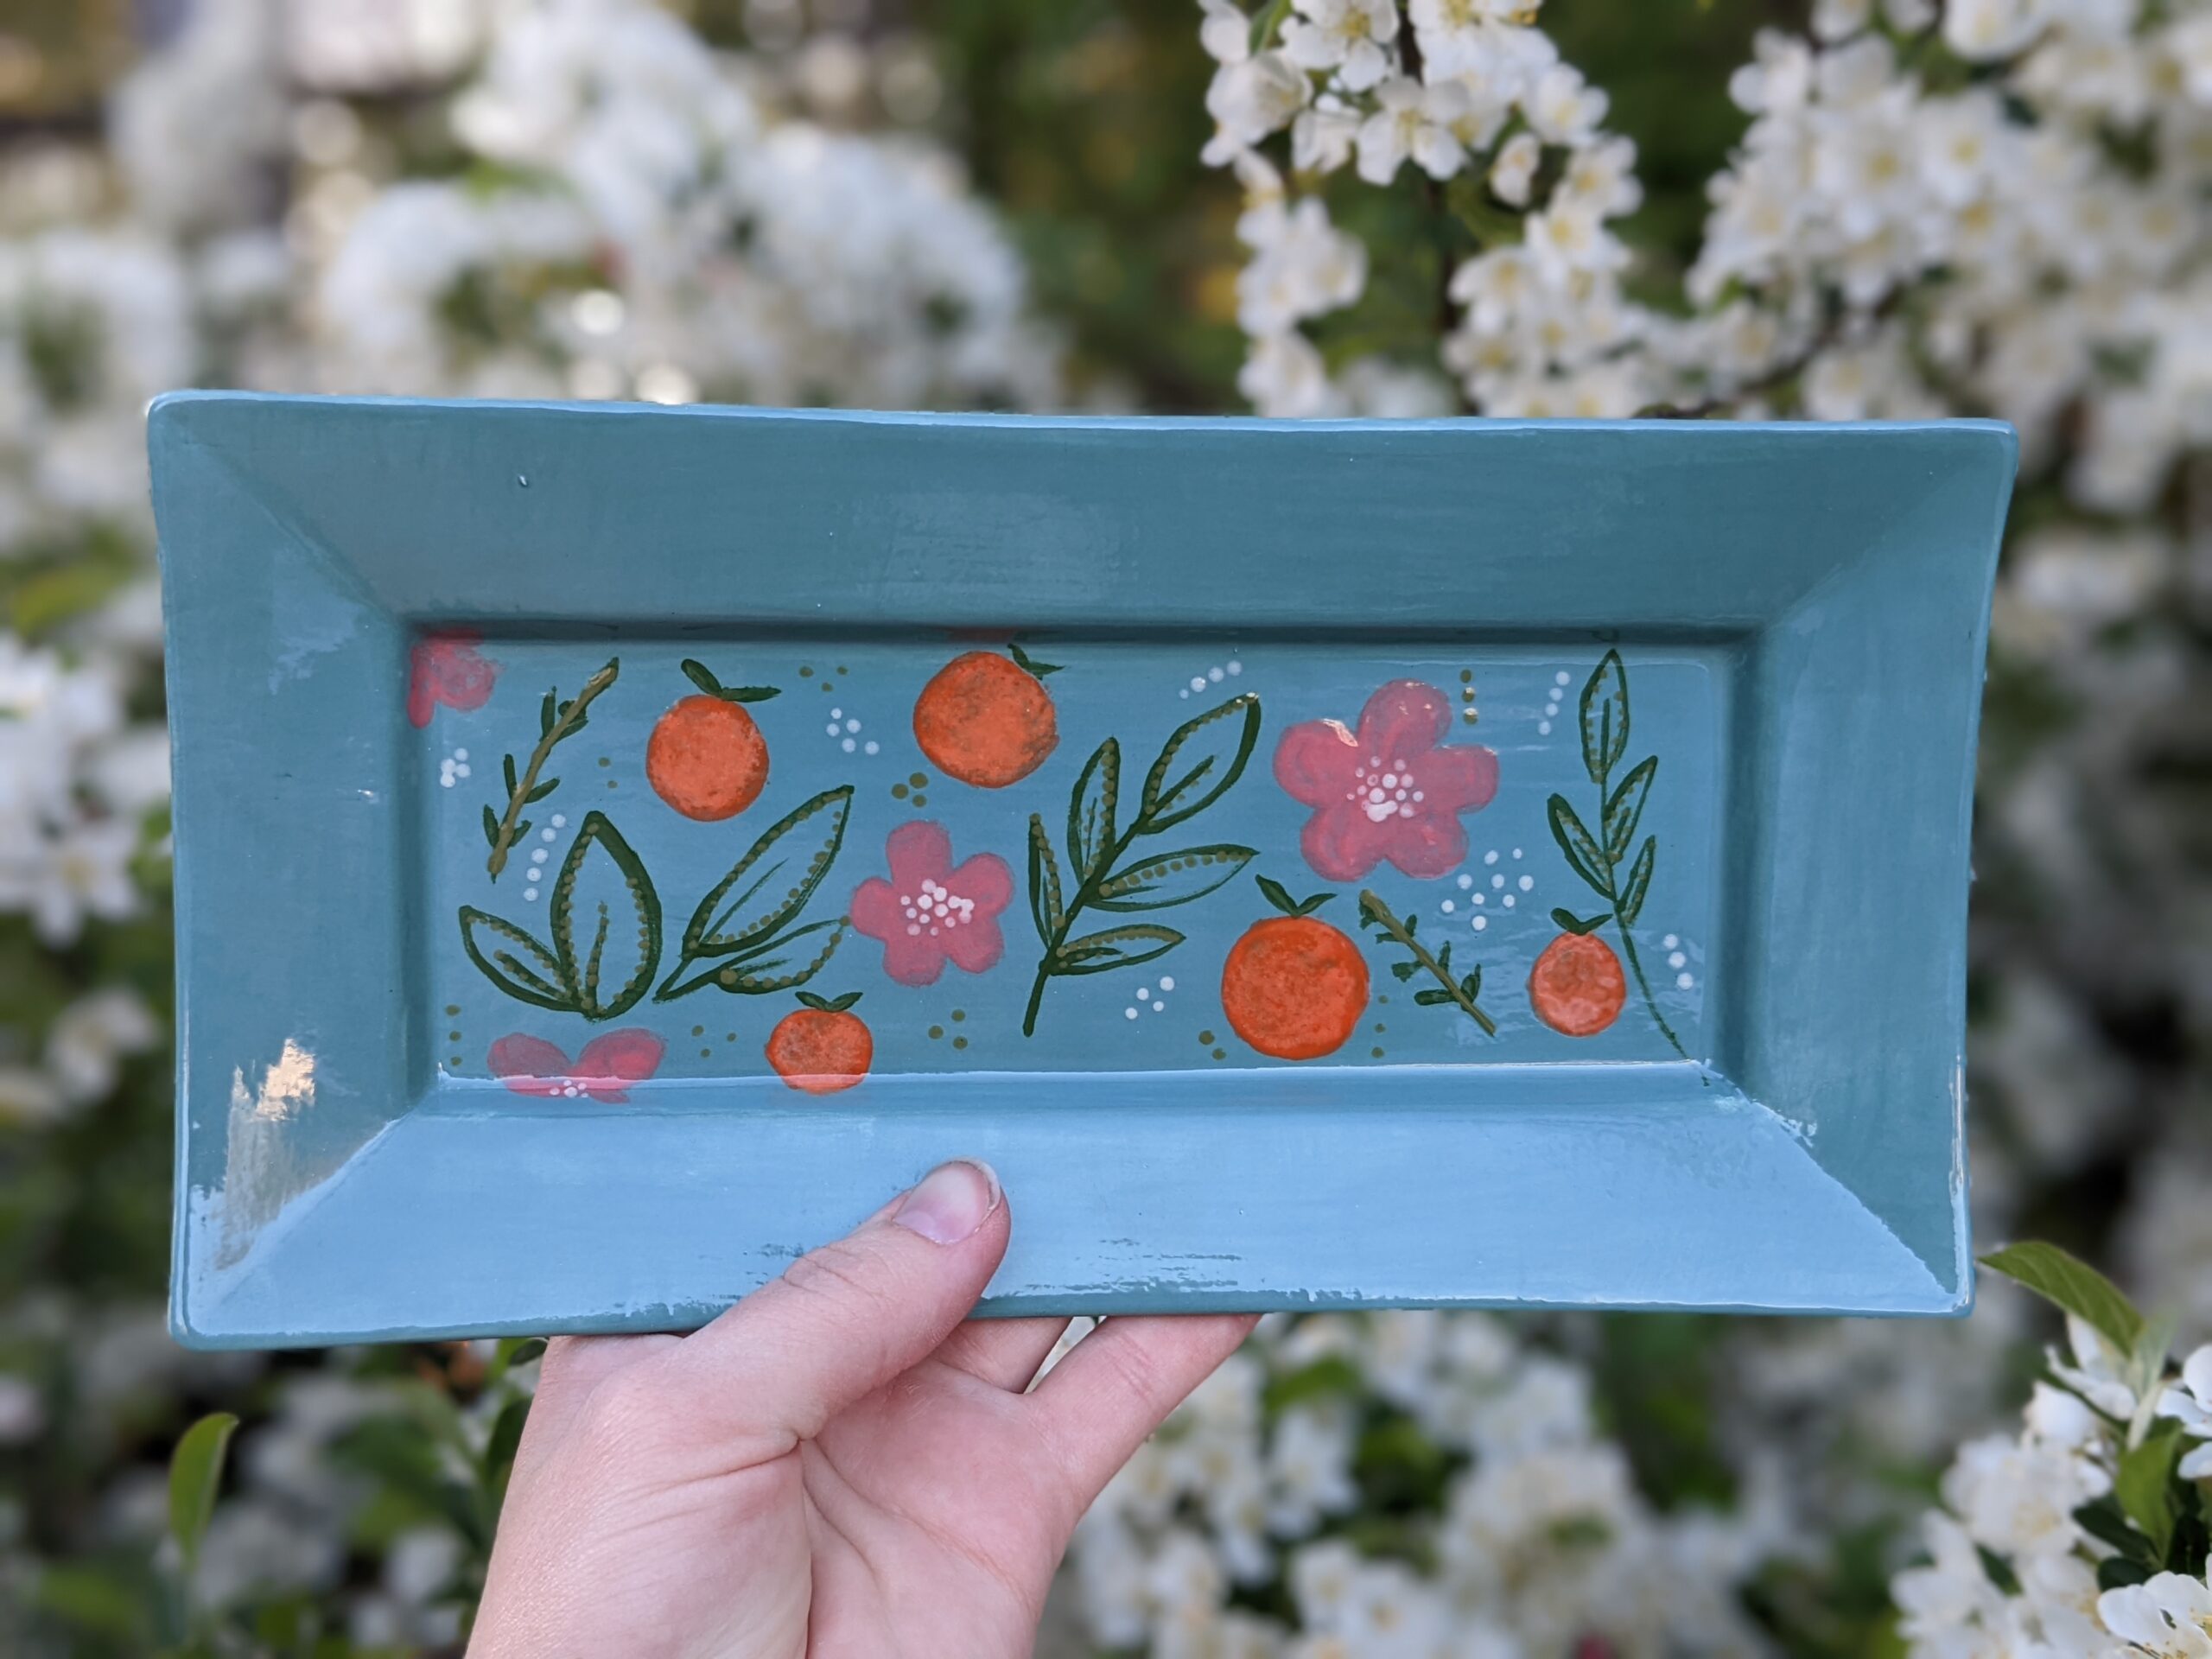 A hand holding an empty blue tray with orange and pink flowers.